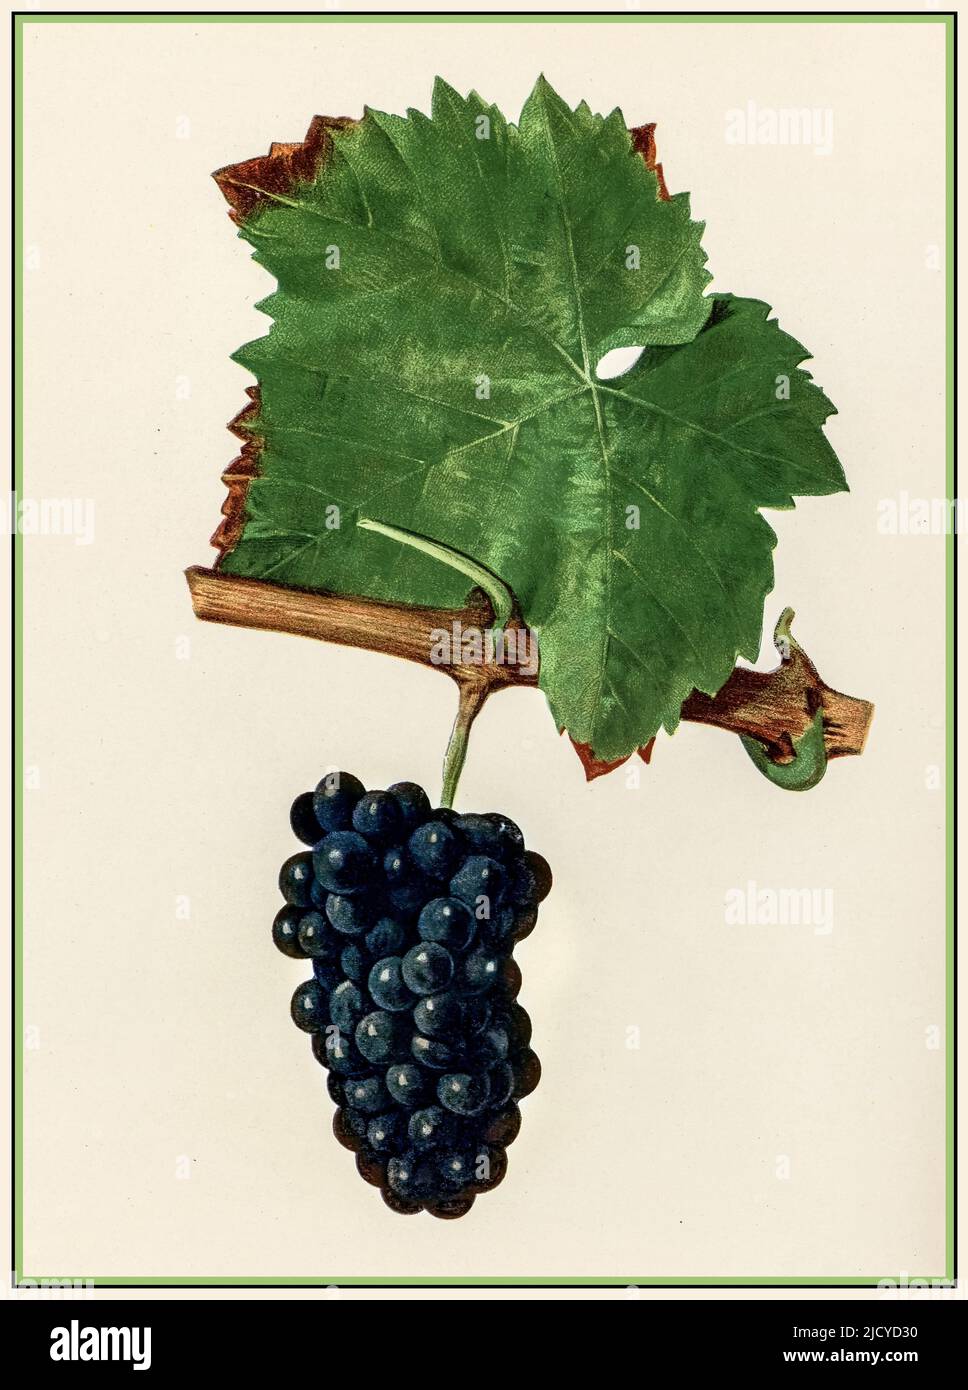 PINOT NOIR GRAPES FRENCH Lithograph Illustration Ripe Bunch of Red Burgundy Wine Grapes on vine with leaf Bourgogne, Côte d’Or, Cote de Beaune France Stock Photo